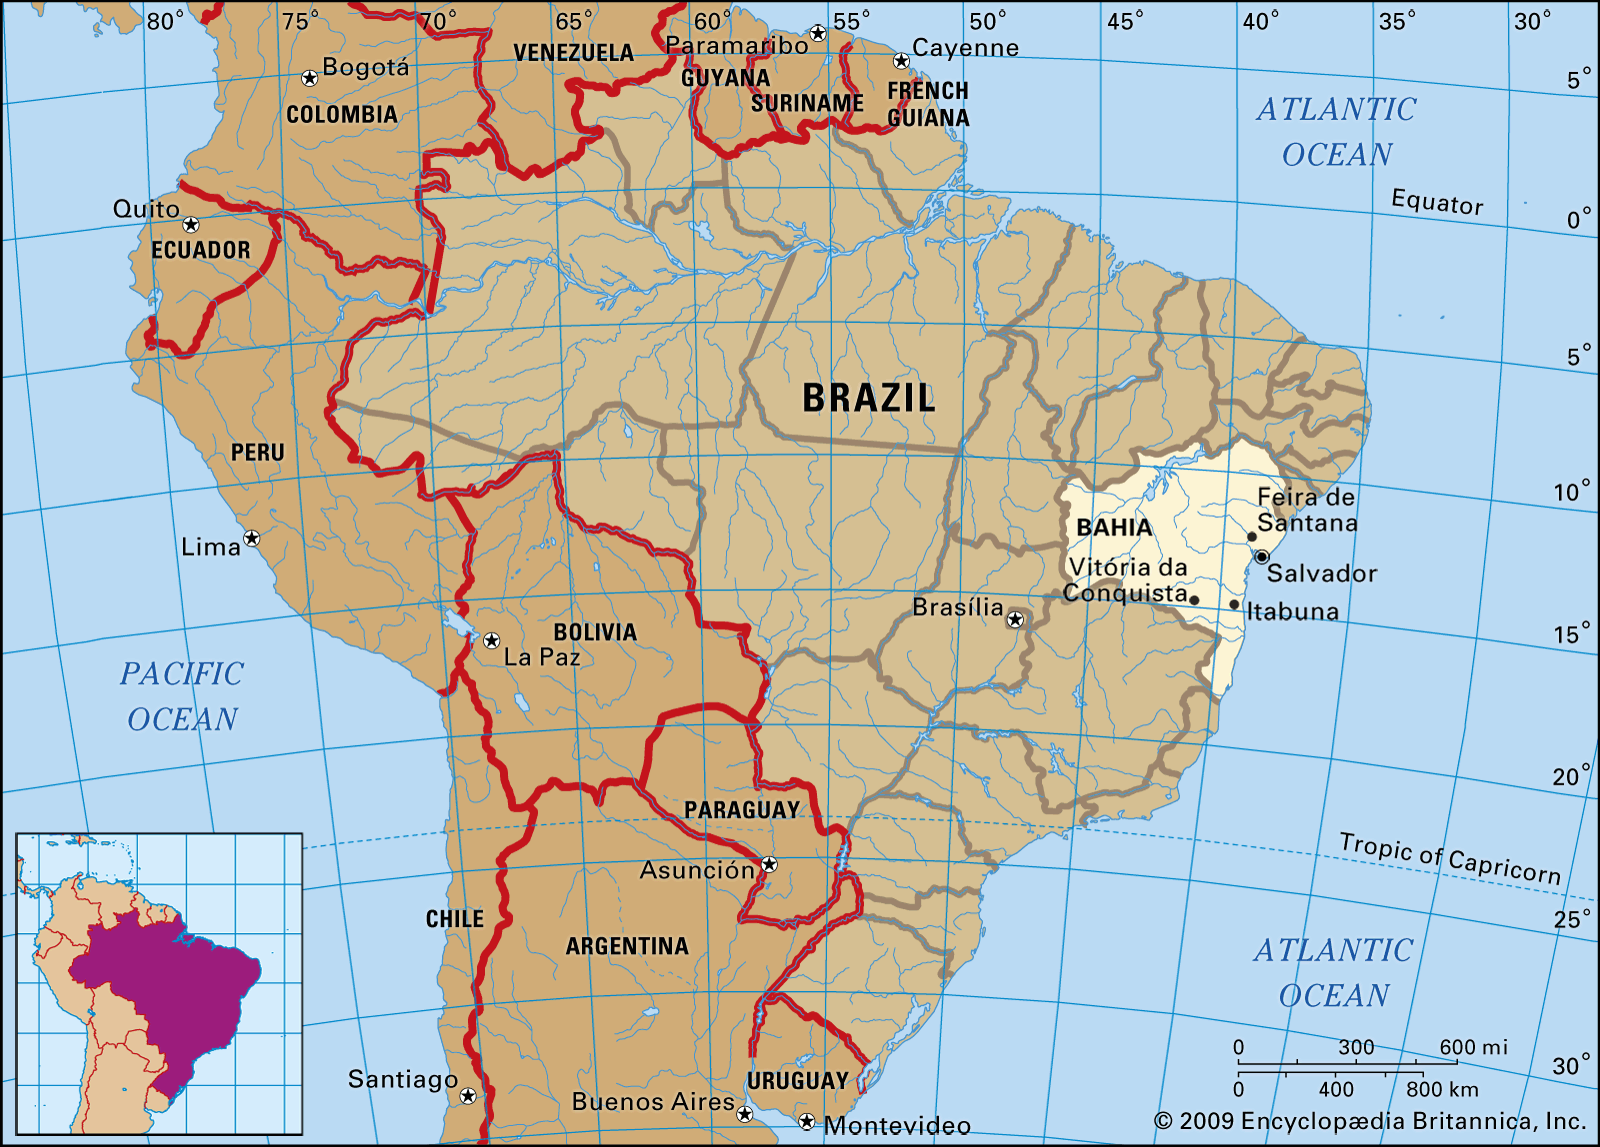  Four municipalities in Bahia state lead Brazil's 2022 violence statistics. (Photo Internet reproduction)